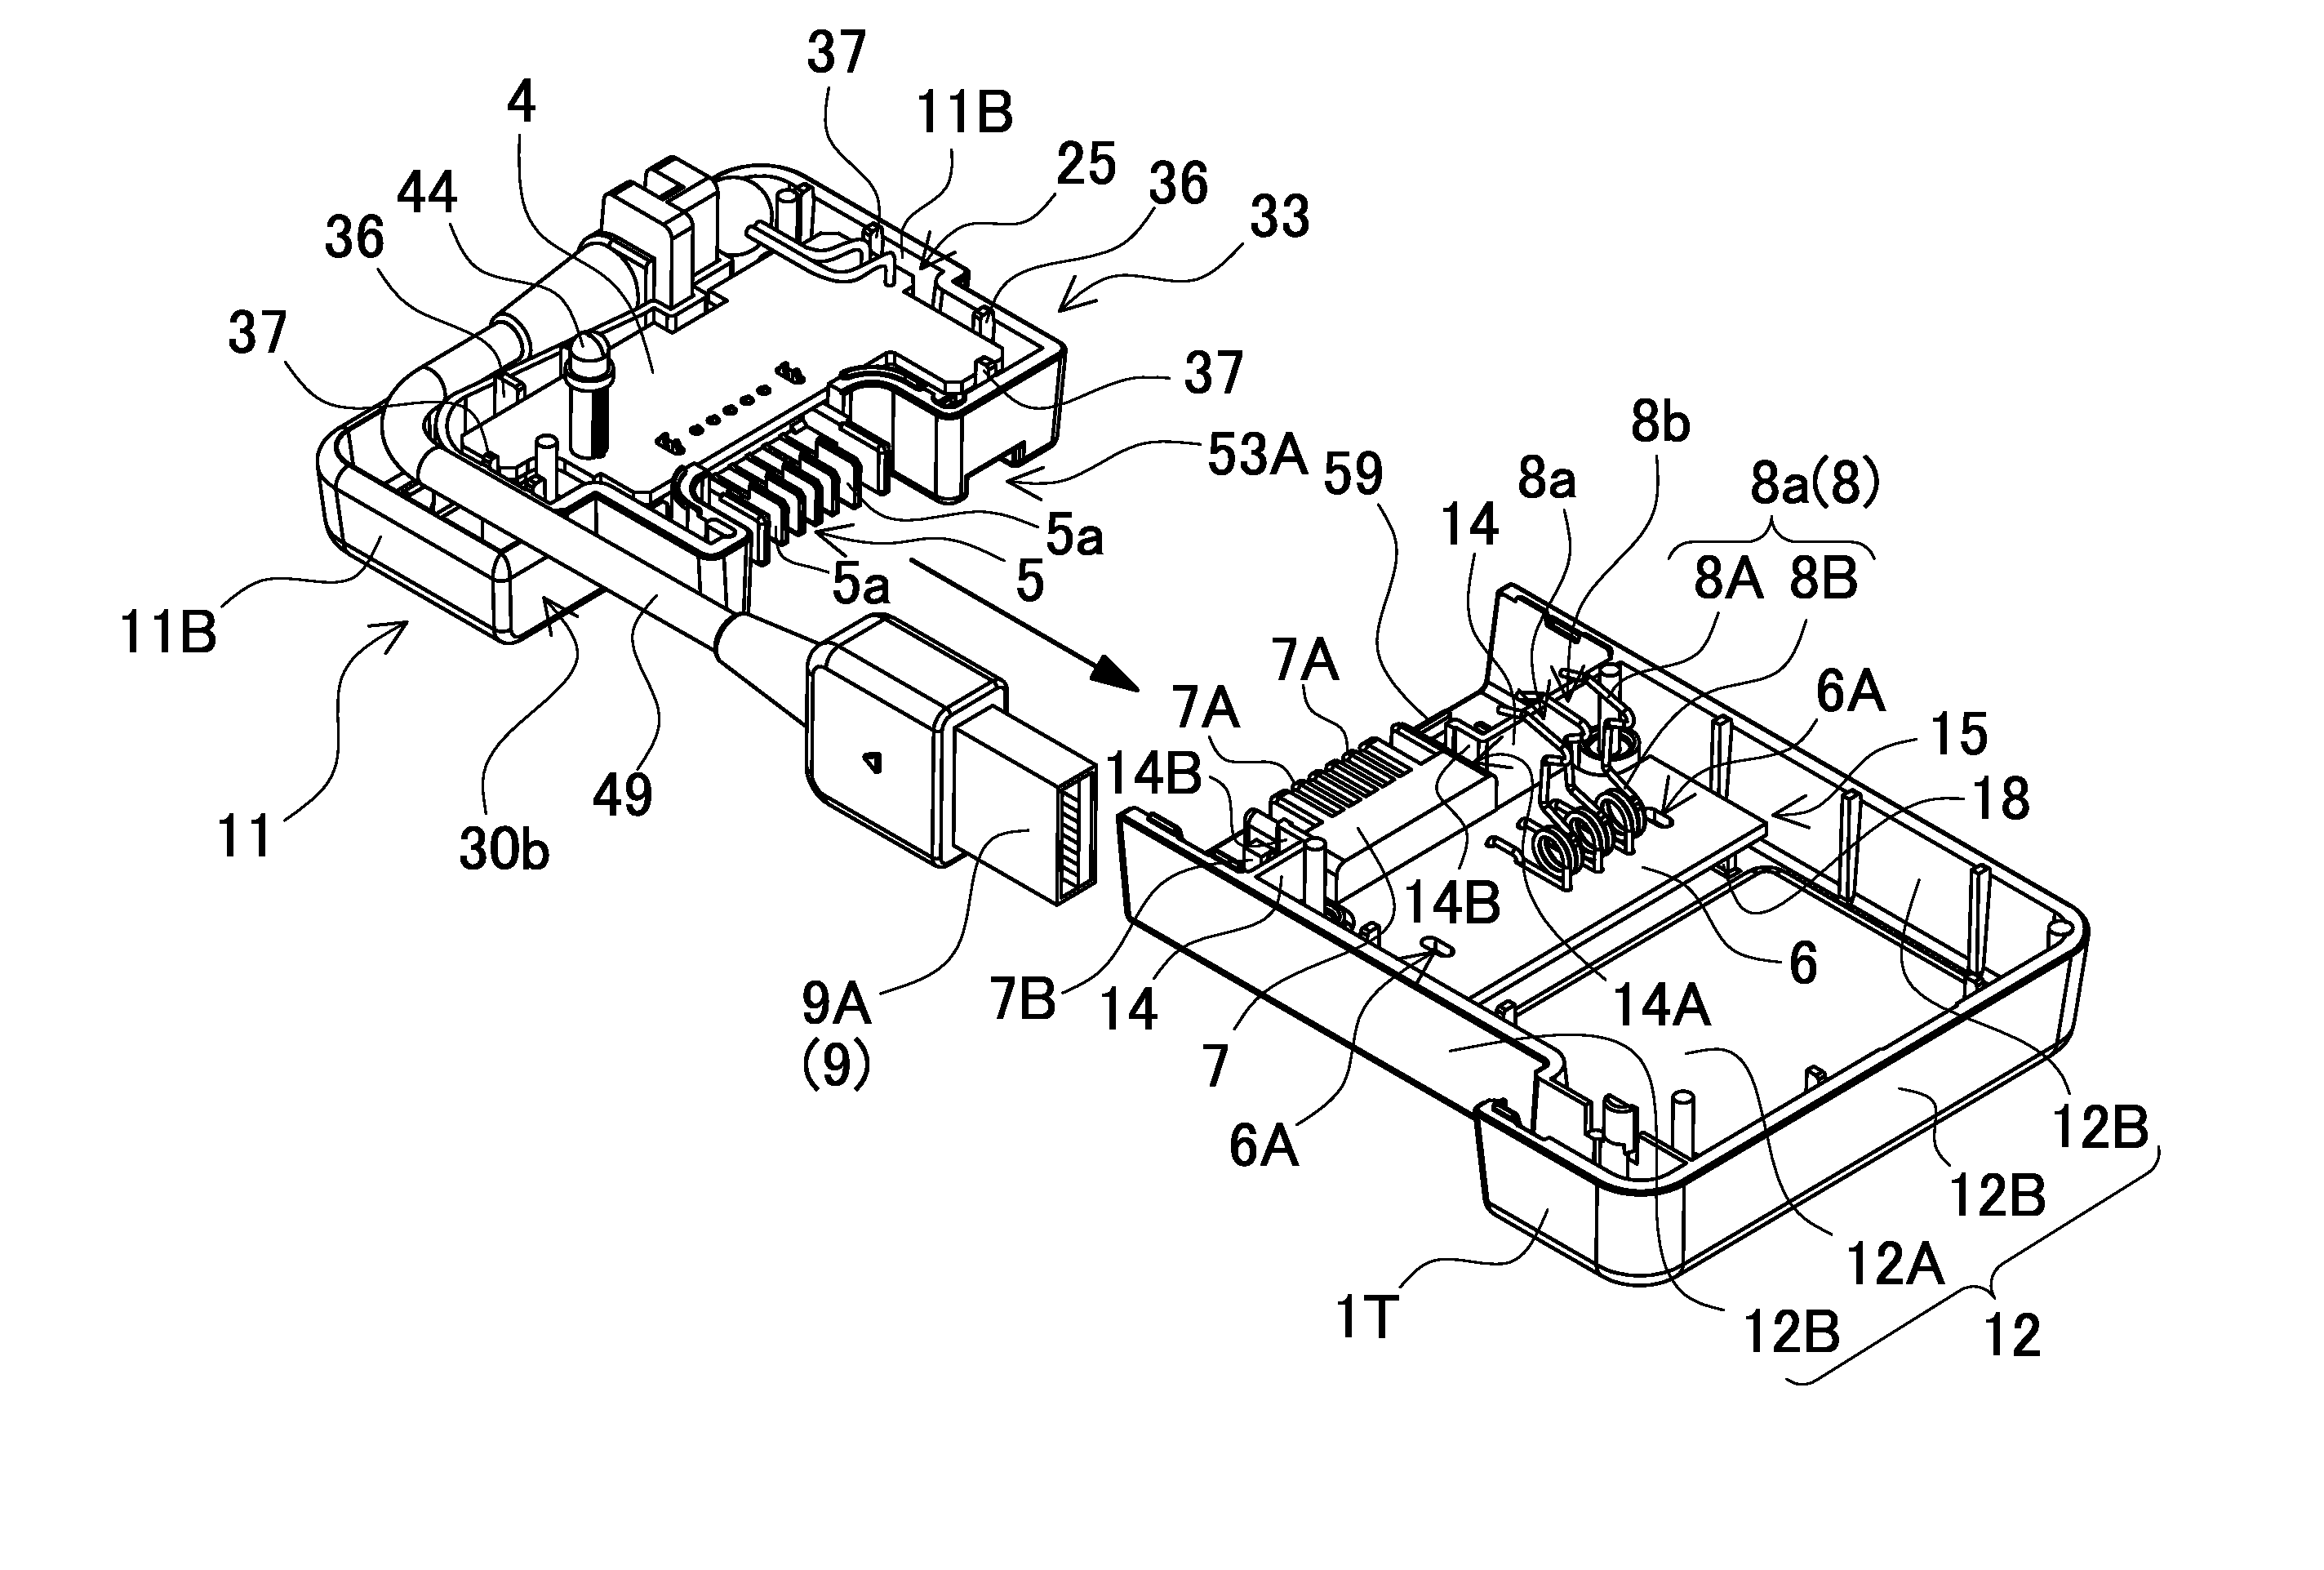 Battery charger, battery pack docking module, and battery pack module